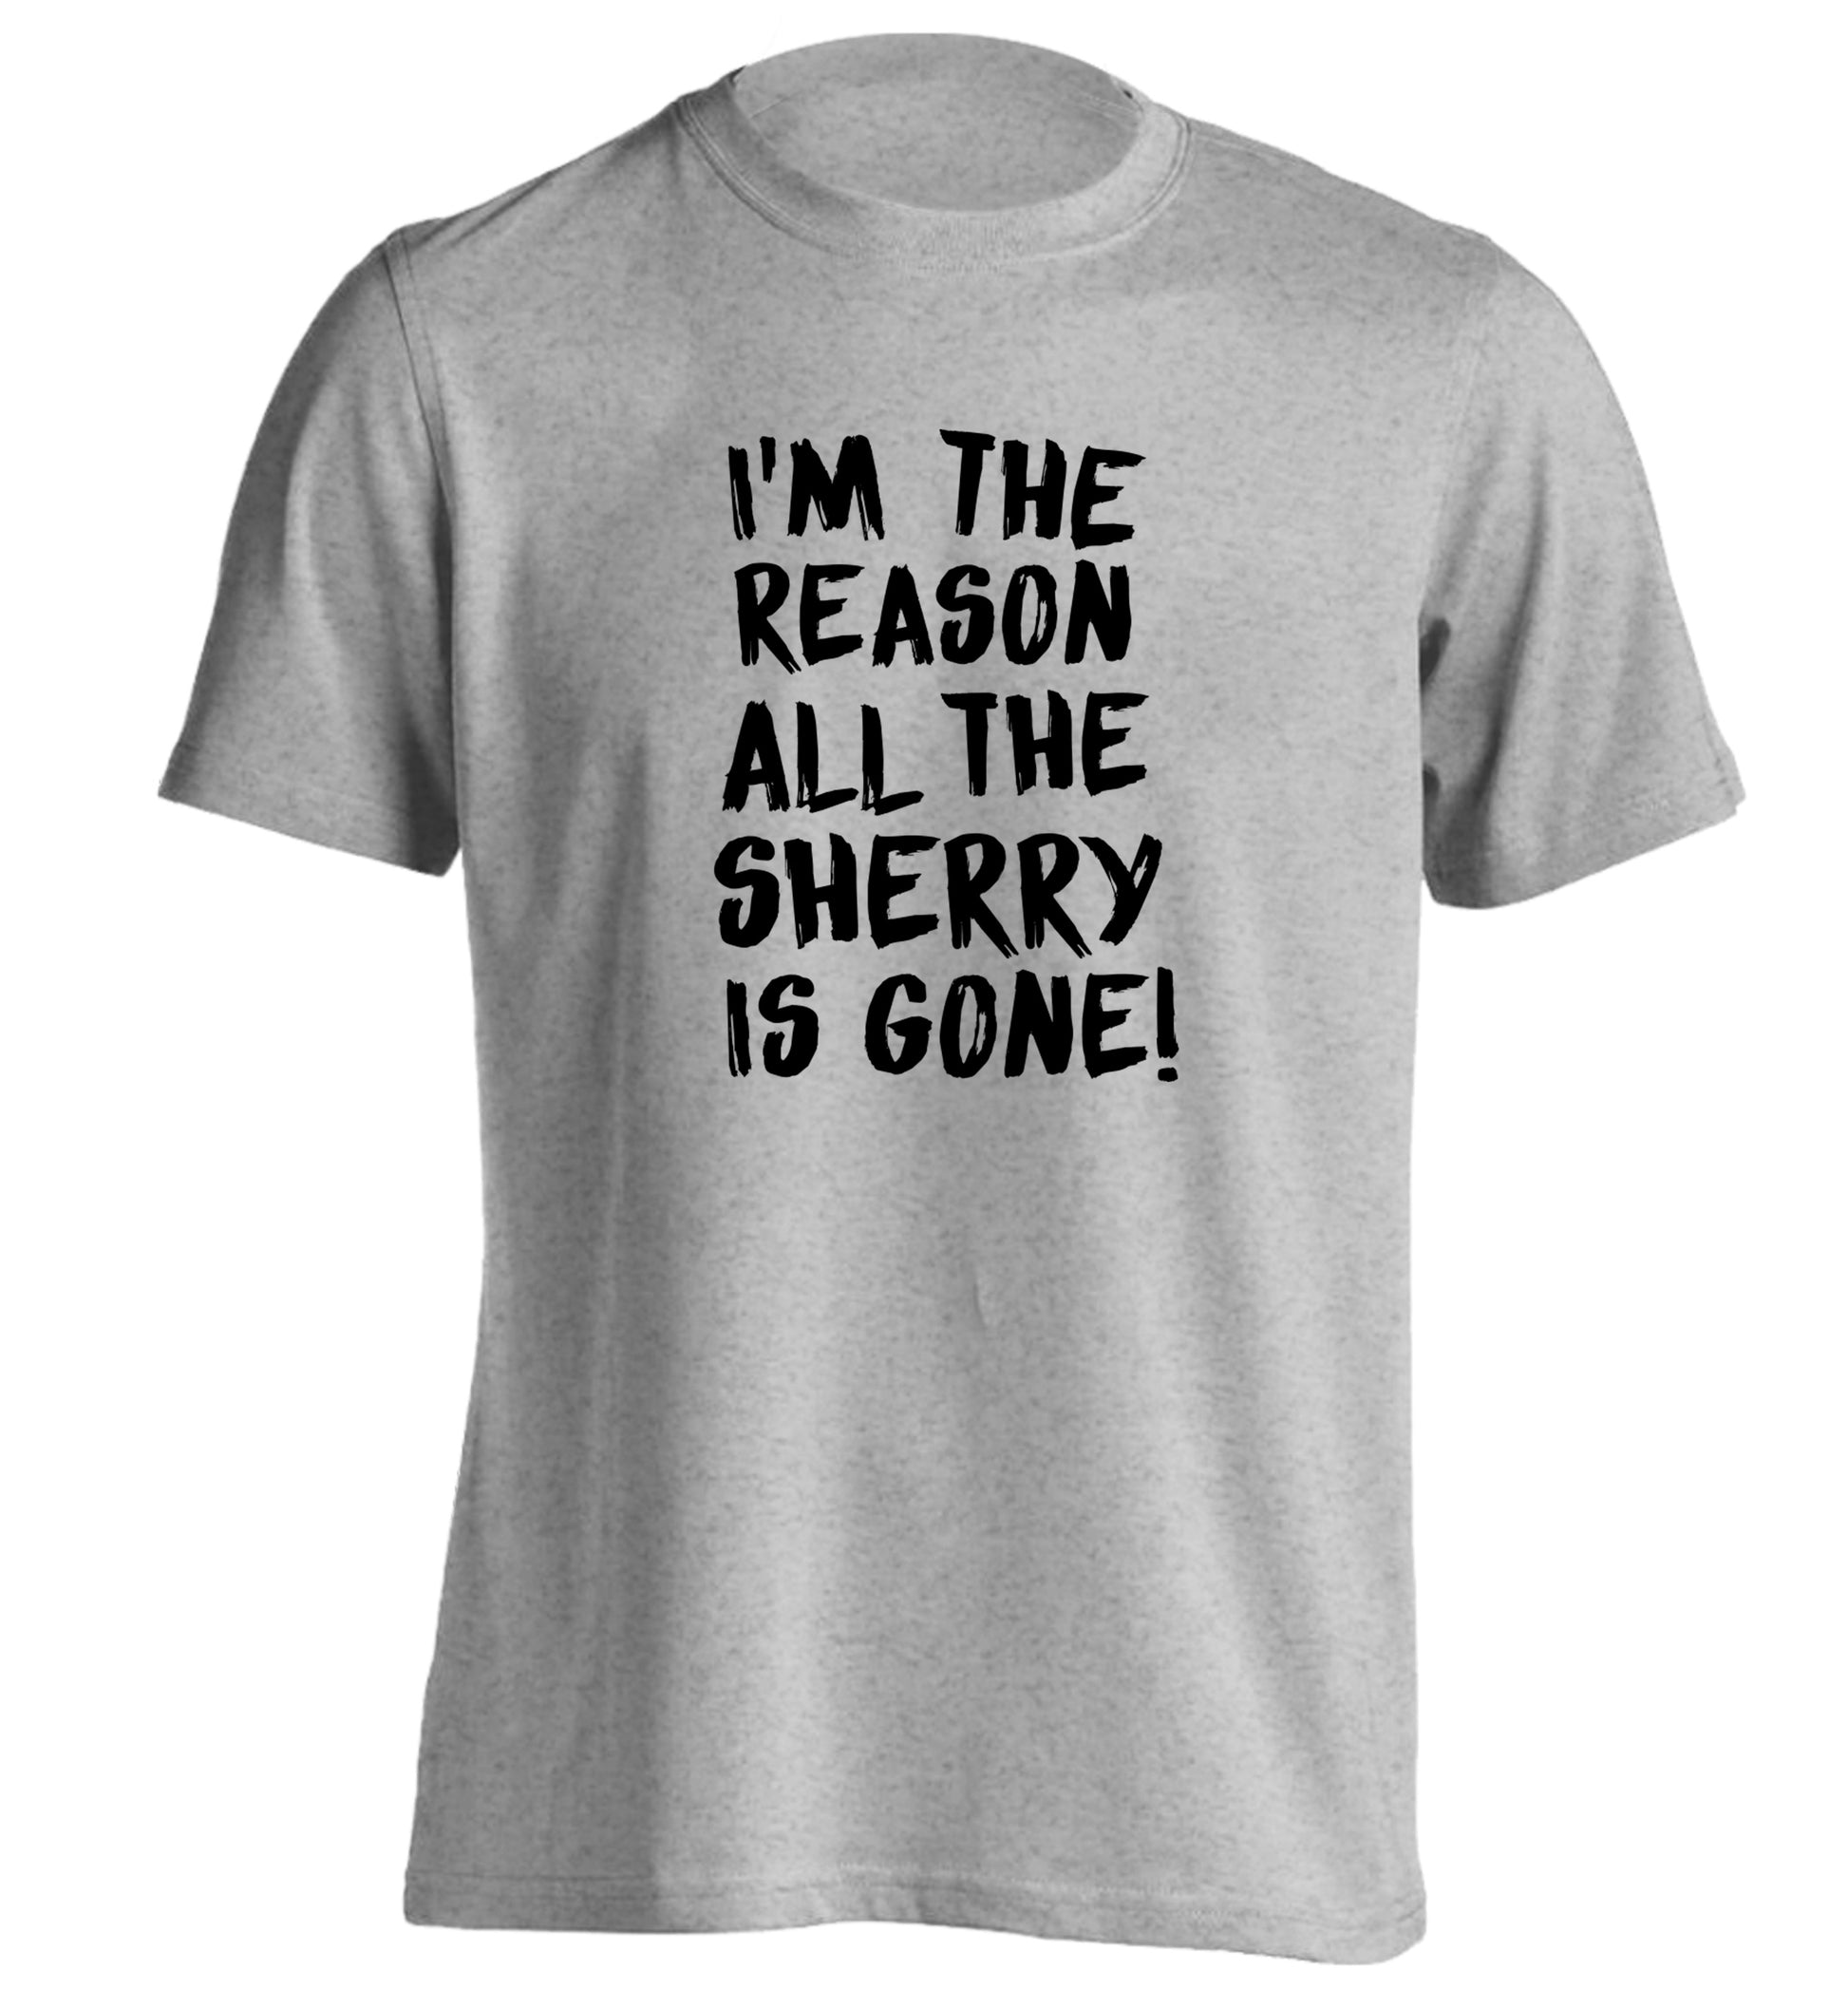 I'm the reason all the sherry is gone adults unisex grey Tshirt 2XL